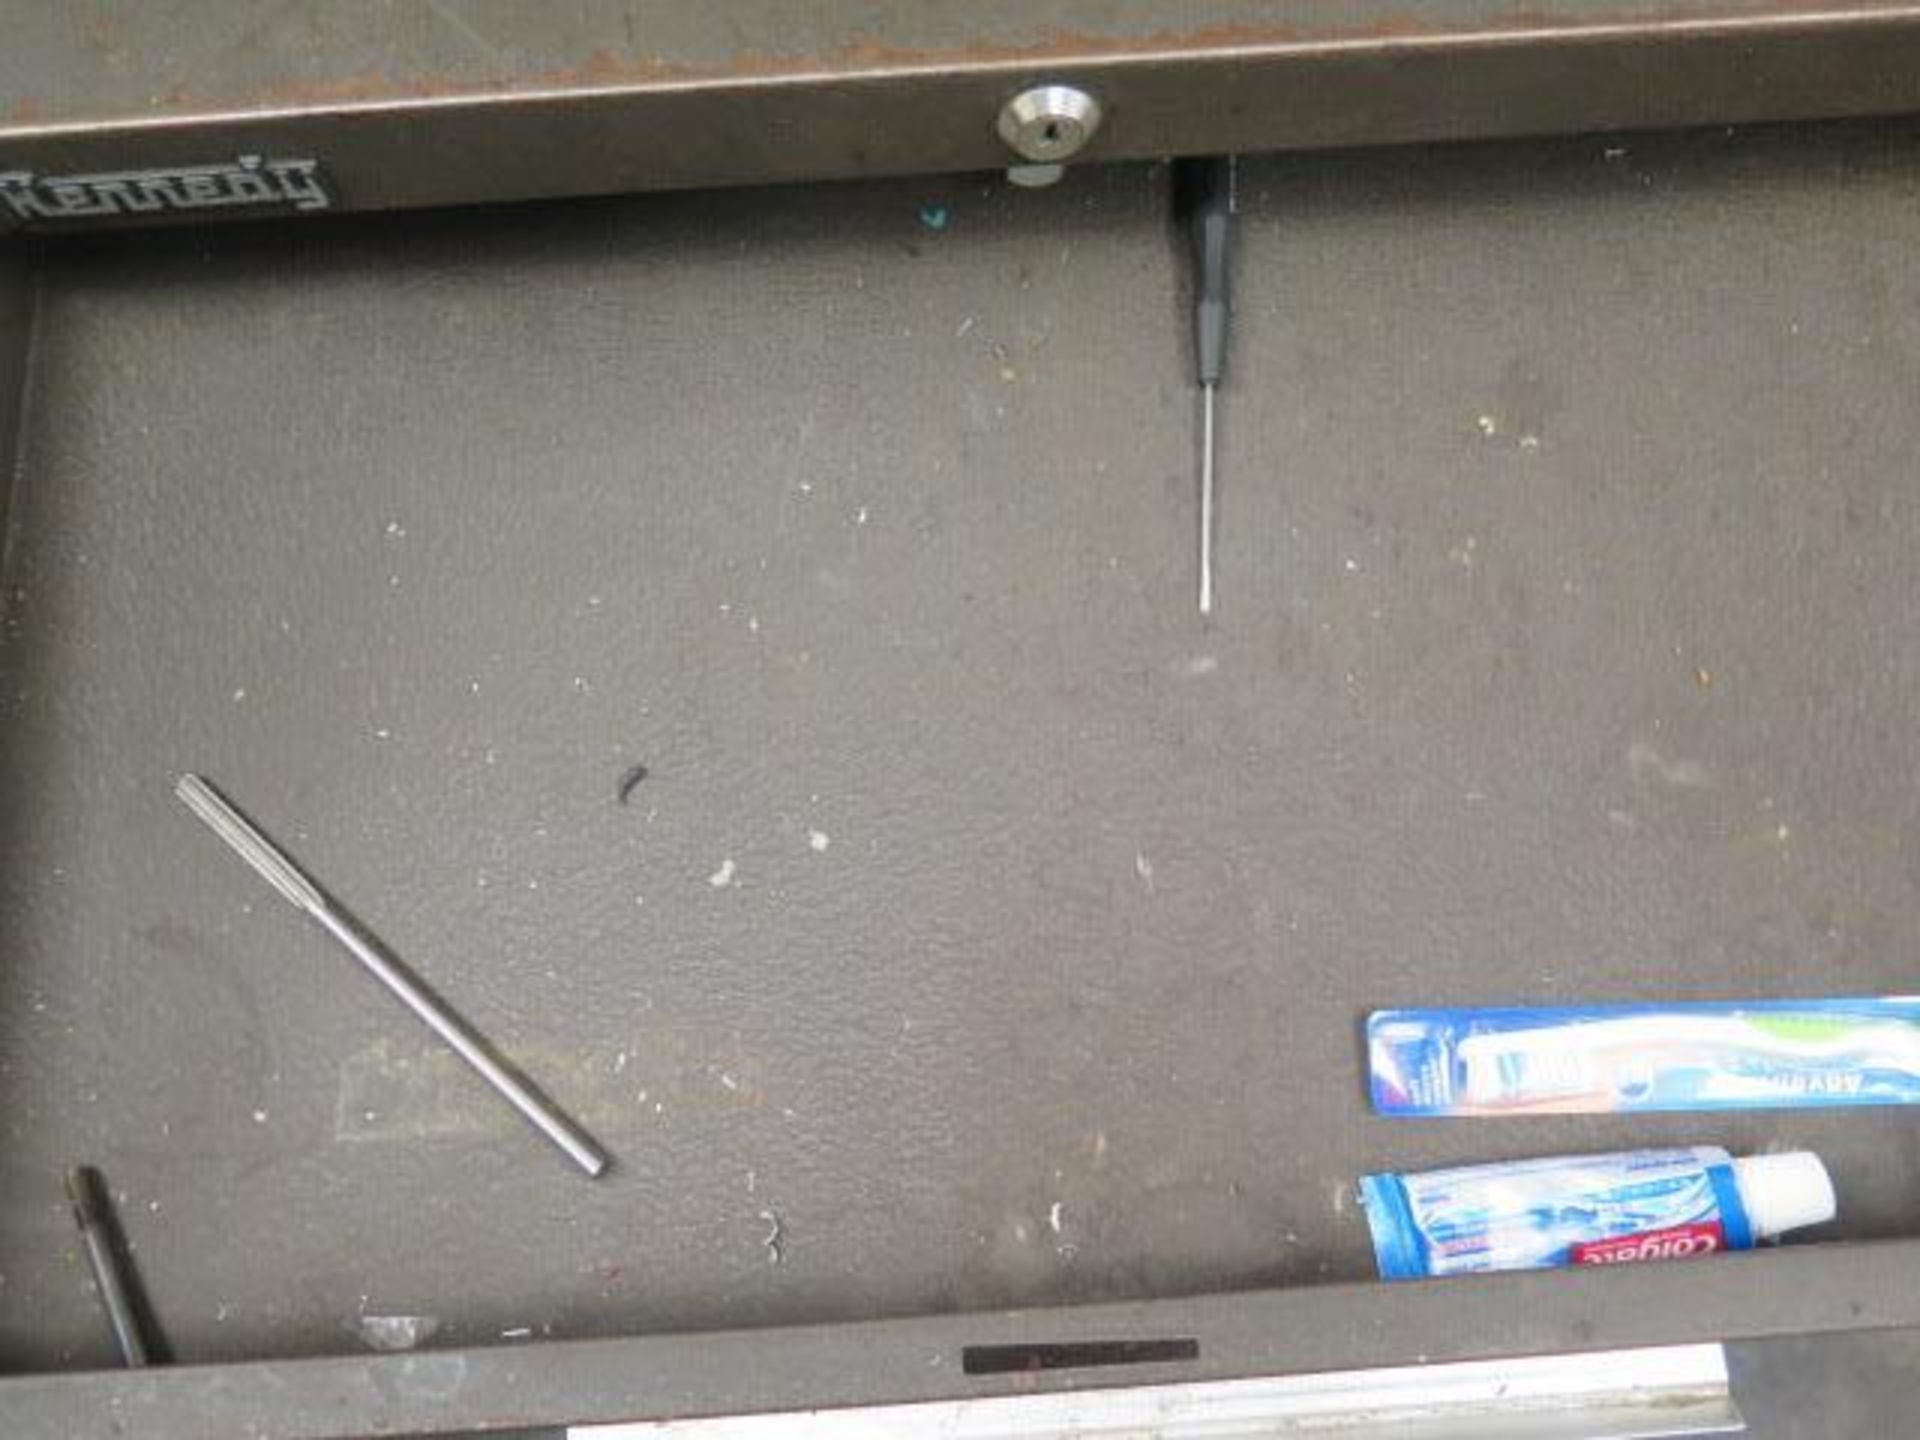 Kennedy Roll_A-Way Tool Box w/ Top Box (SOLD AS-IS - NO WARRANTY) - Image 5 of 7